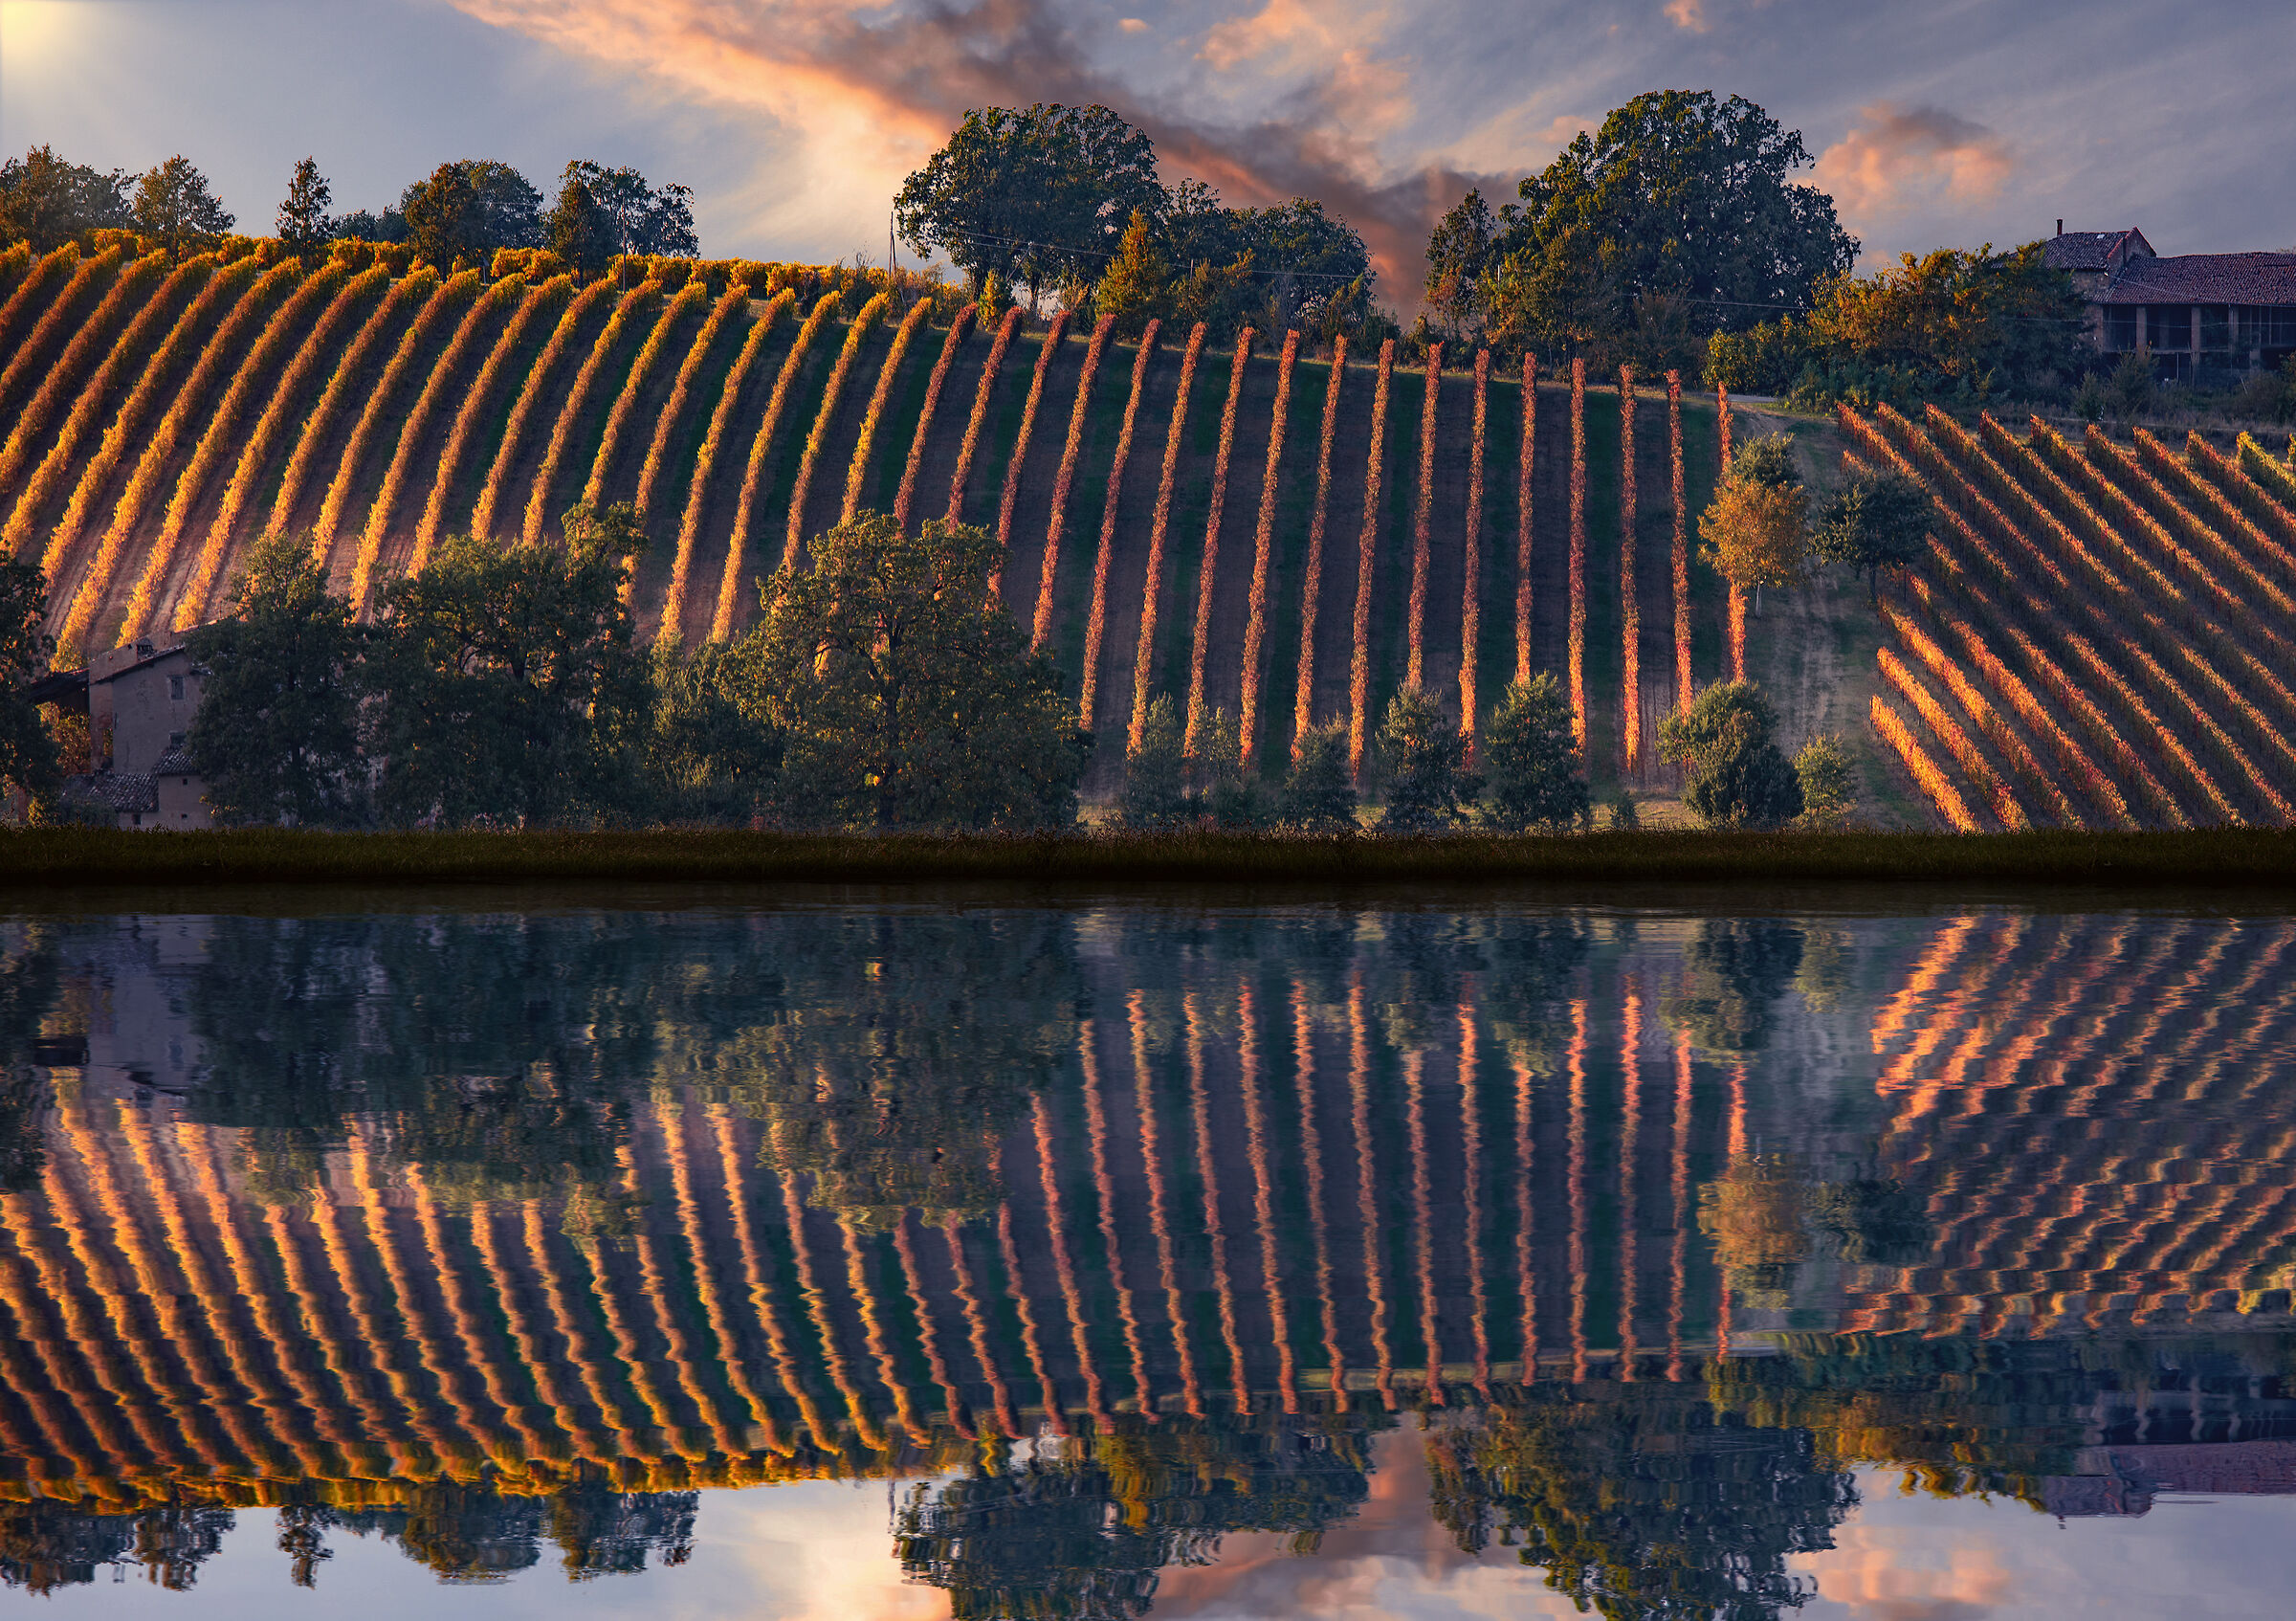 vineyard with reflection in water (invented).....